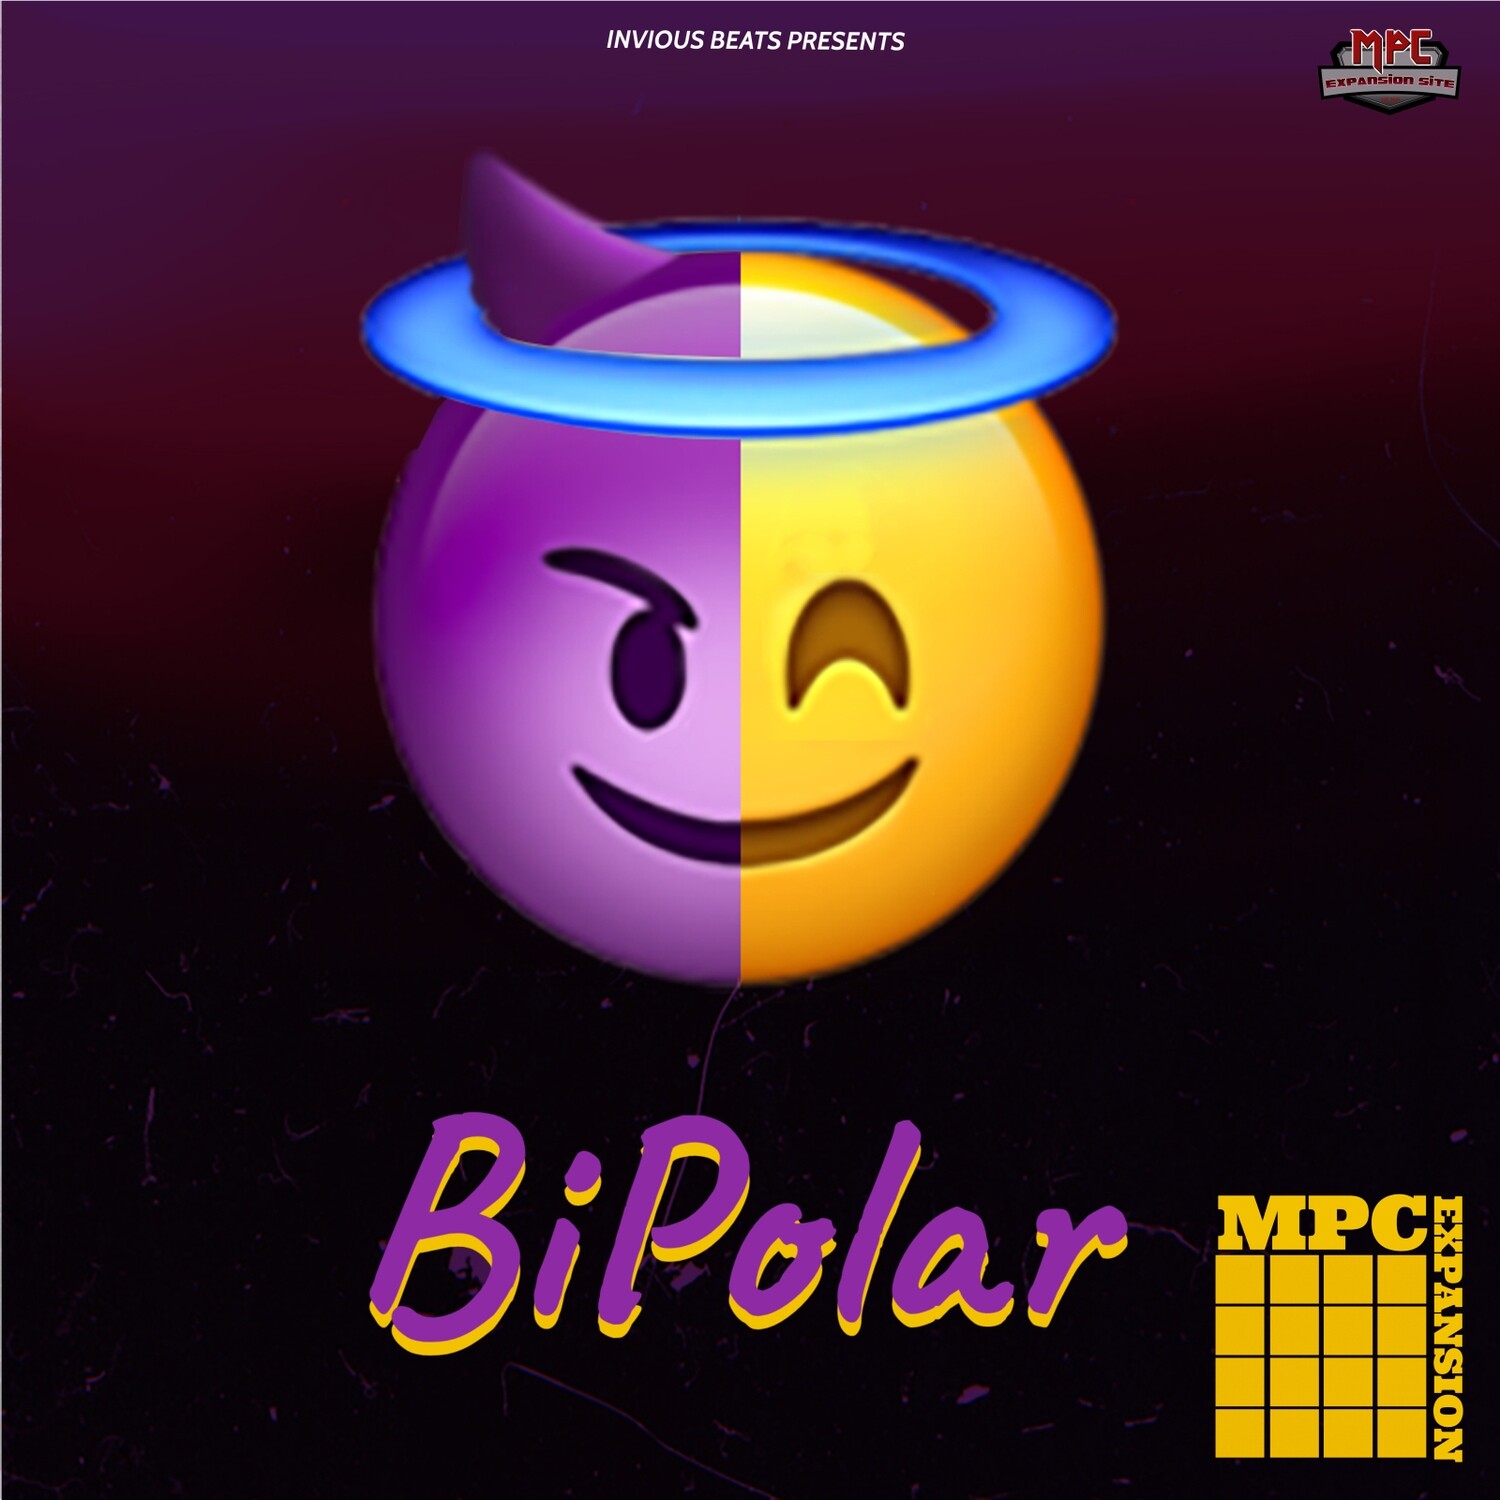 MPC EXPANSION 'BIPOLAR' by INVIOUS